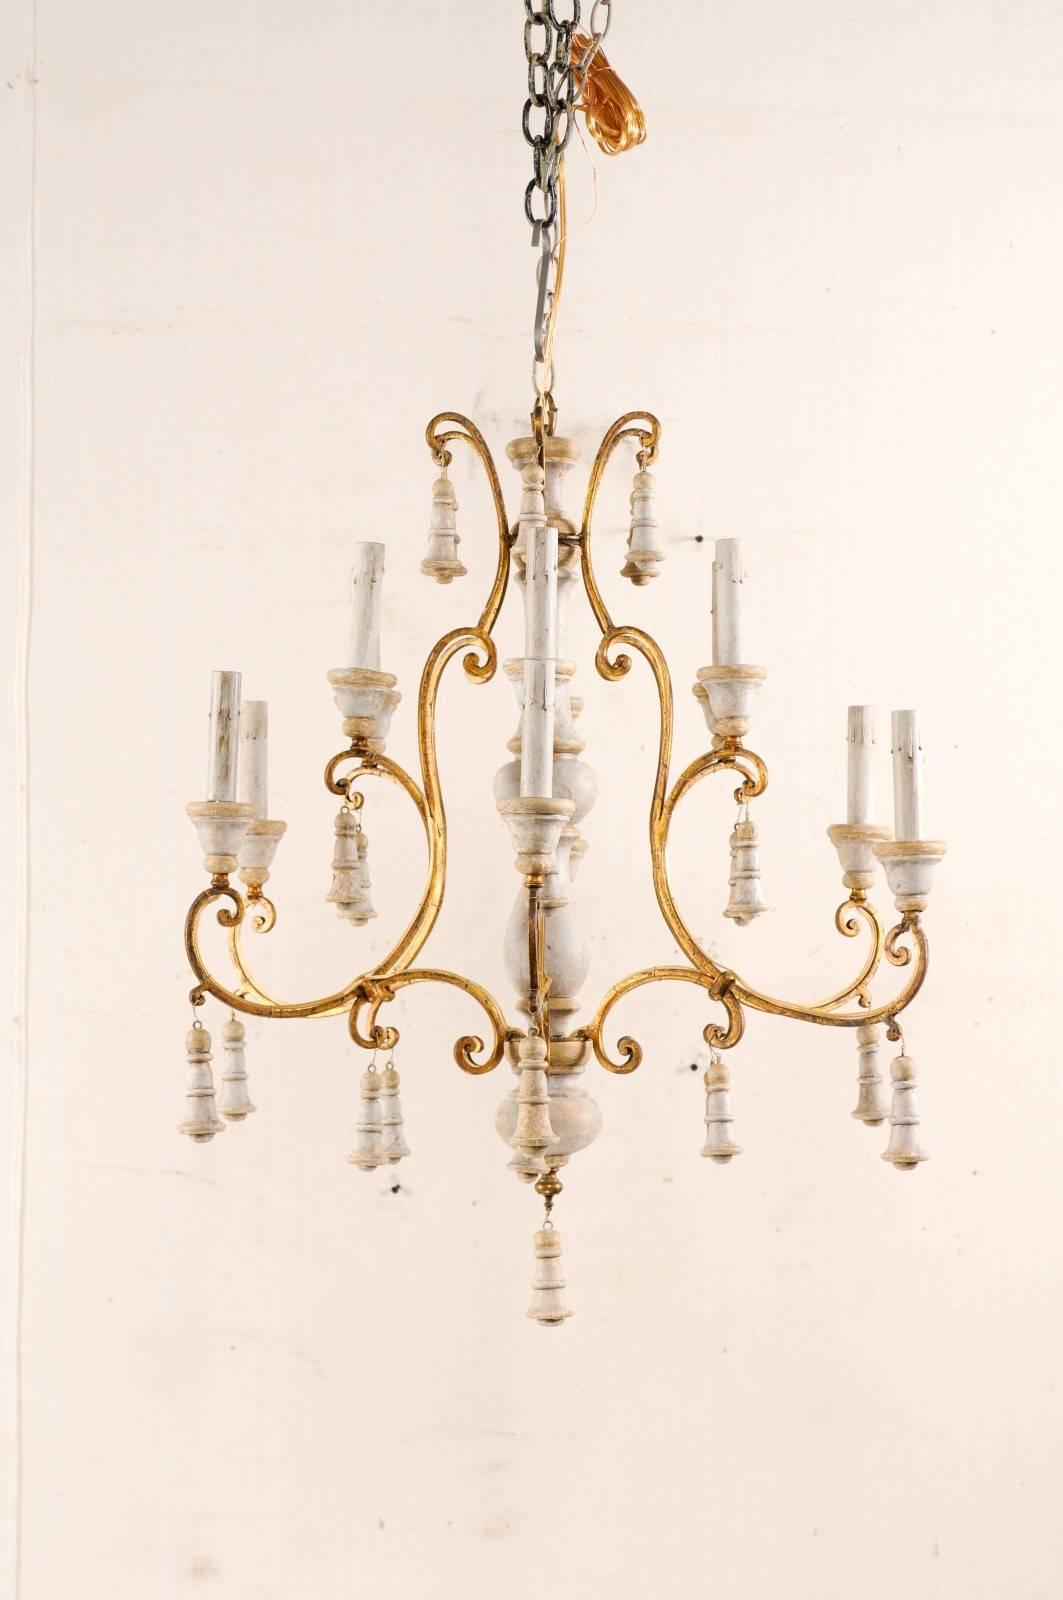 20th Century Exquisite Italian Two-Tiered Twelve-Light Carved, Painted and Gilded Chandelier